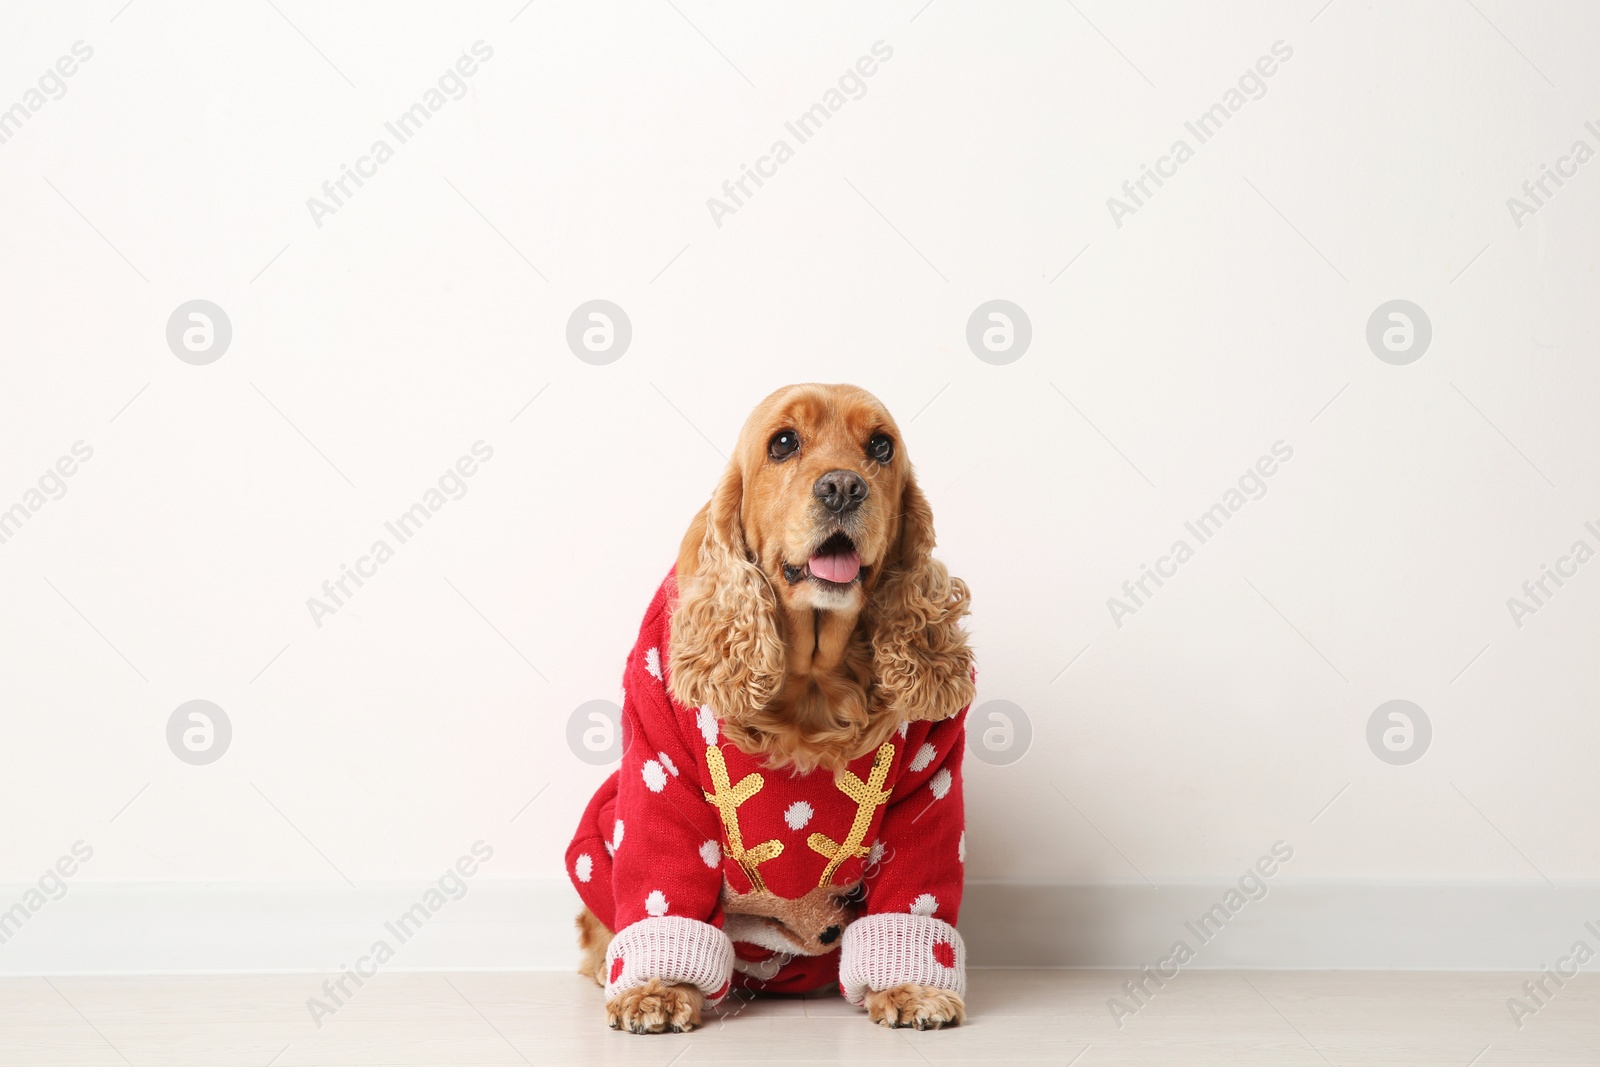 Photo of Adorable Cocker Spaniel in Christmas sweater near white wall